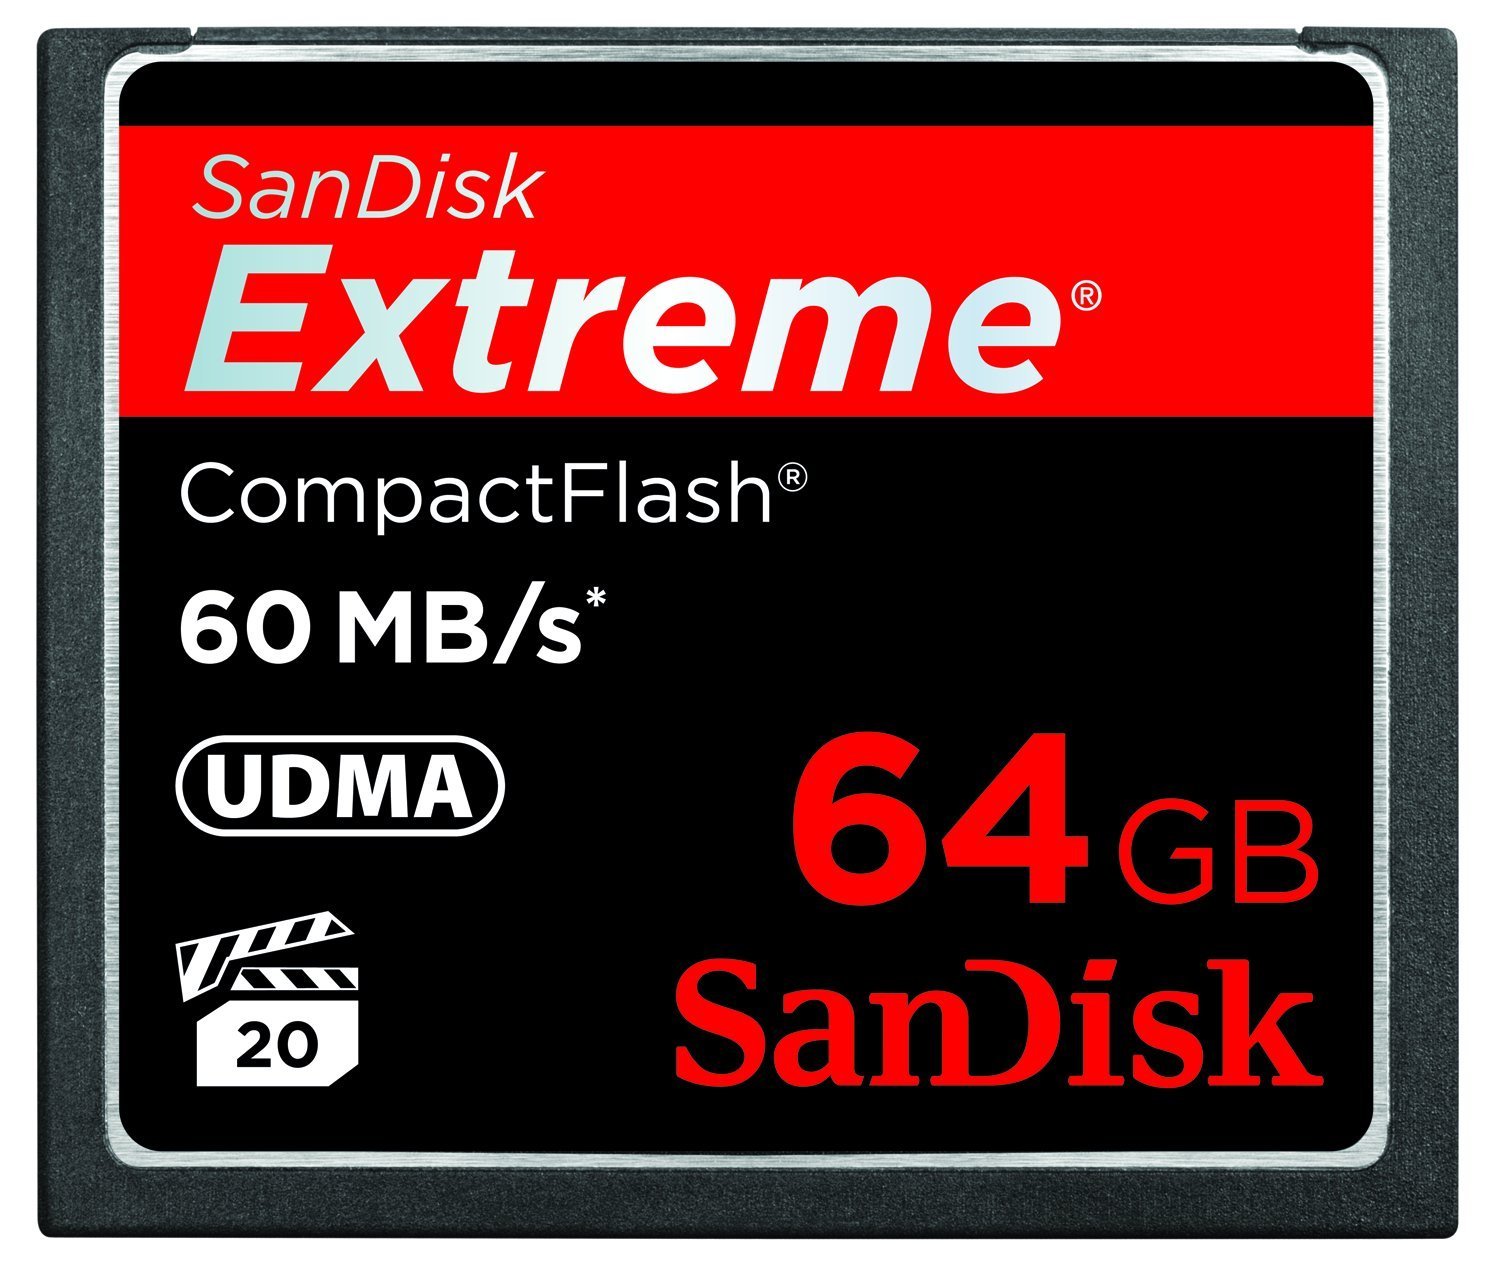 SanDisk Extreme CompactFlash 64 GB Memory Card 60MB/s SDCFX-064G